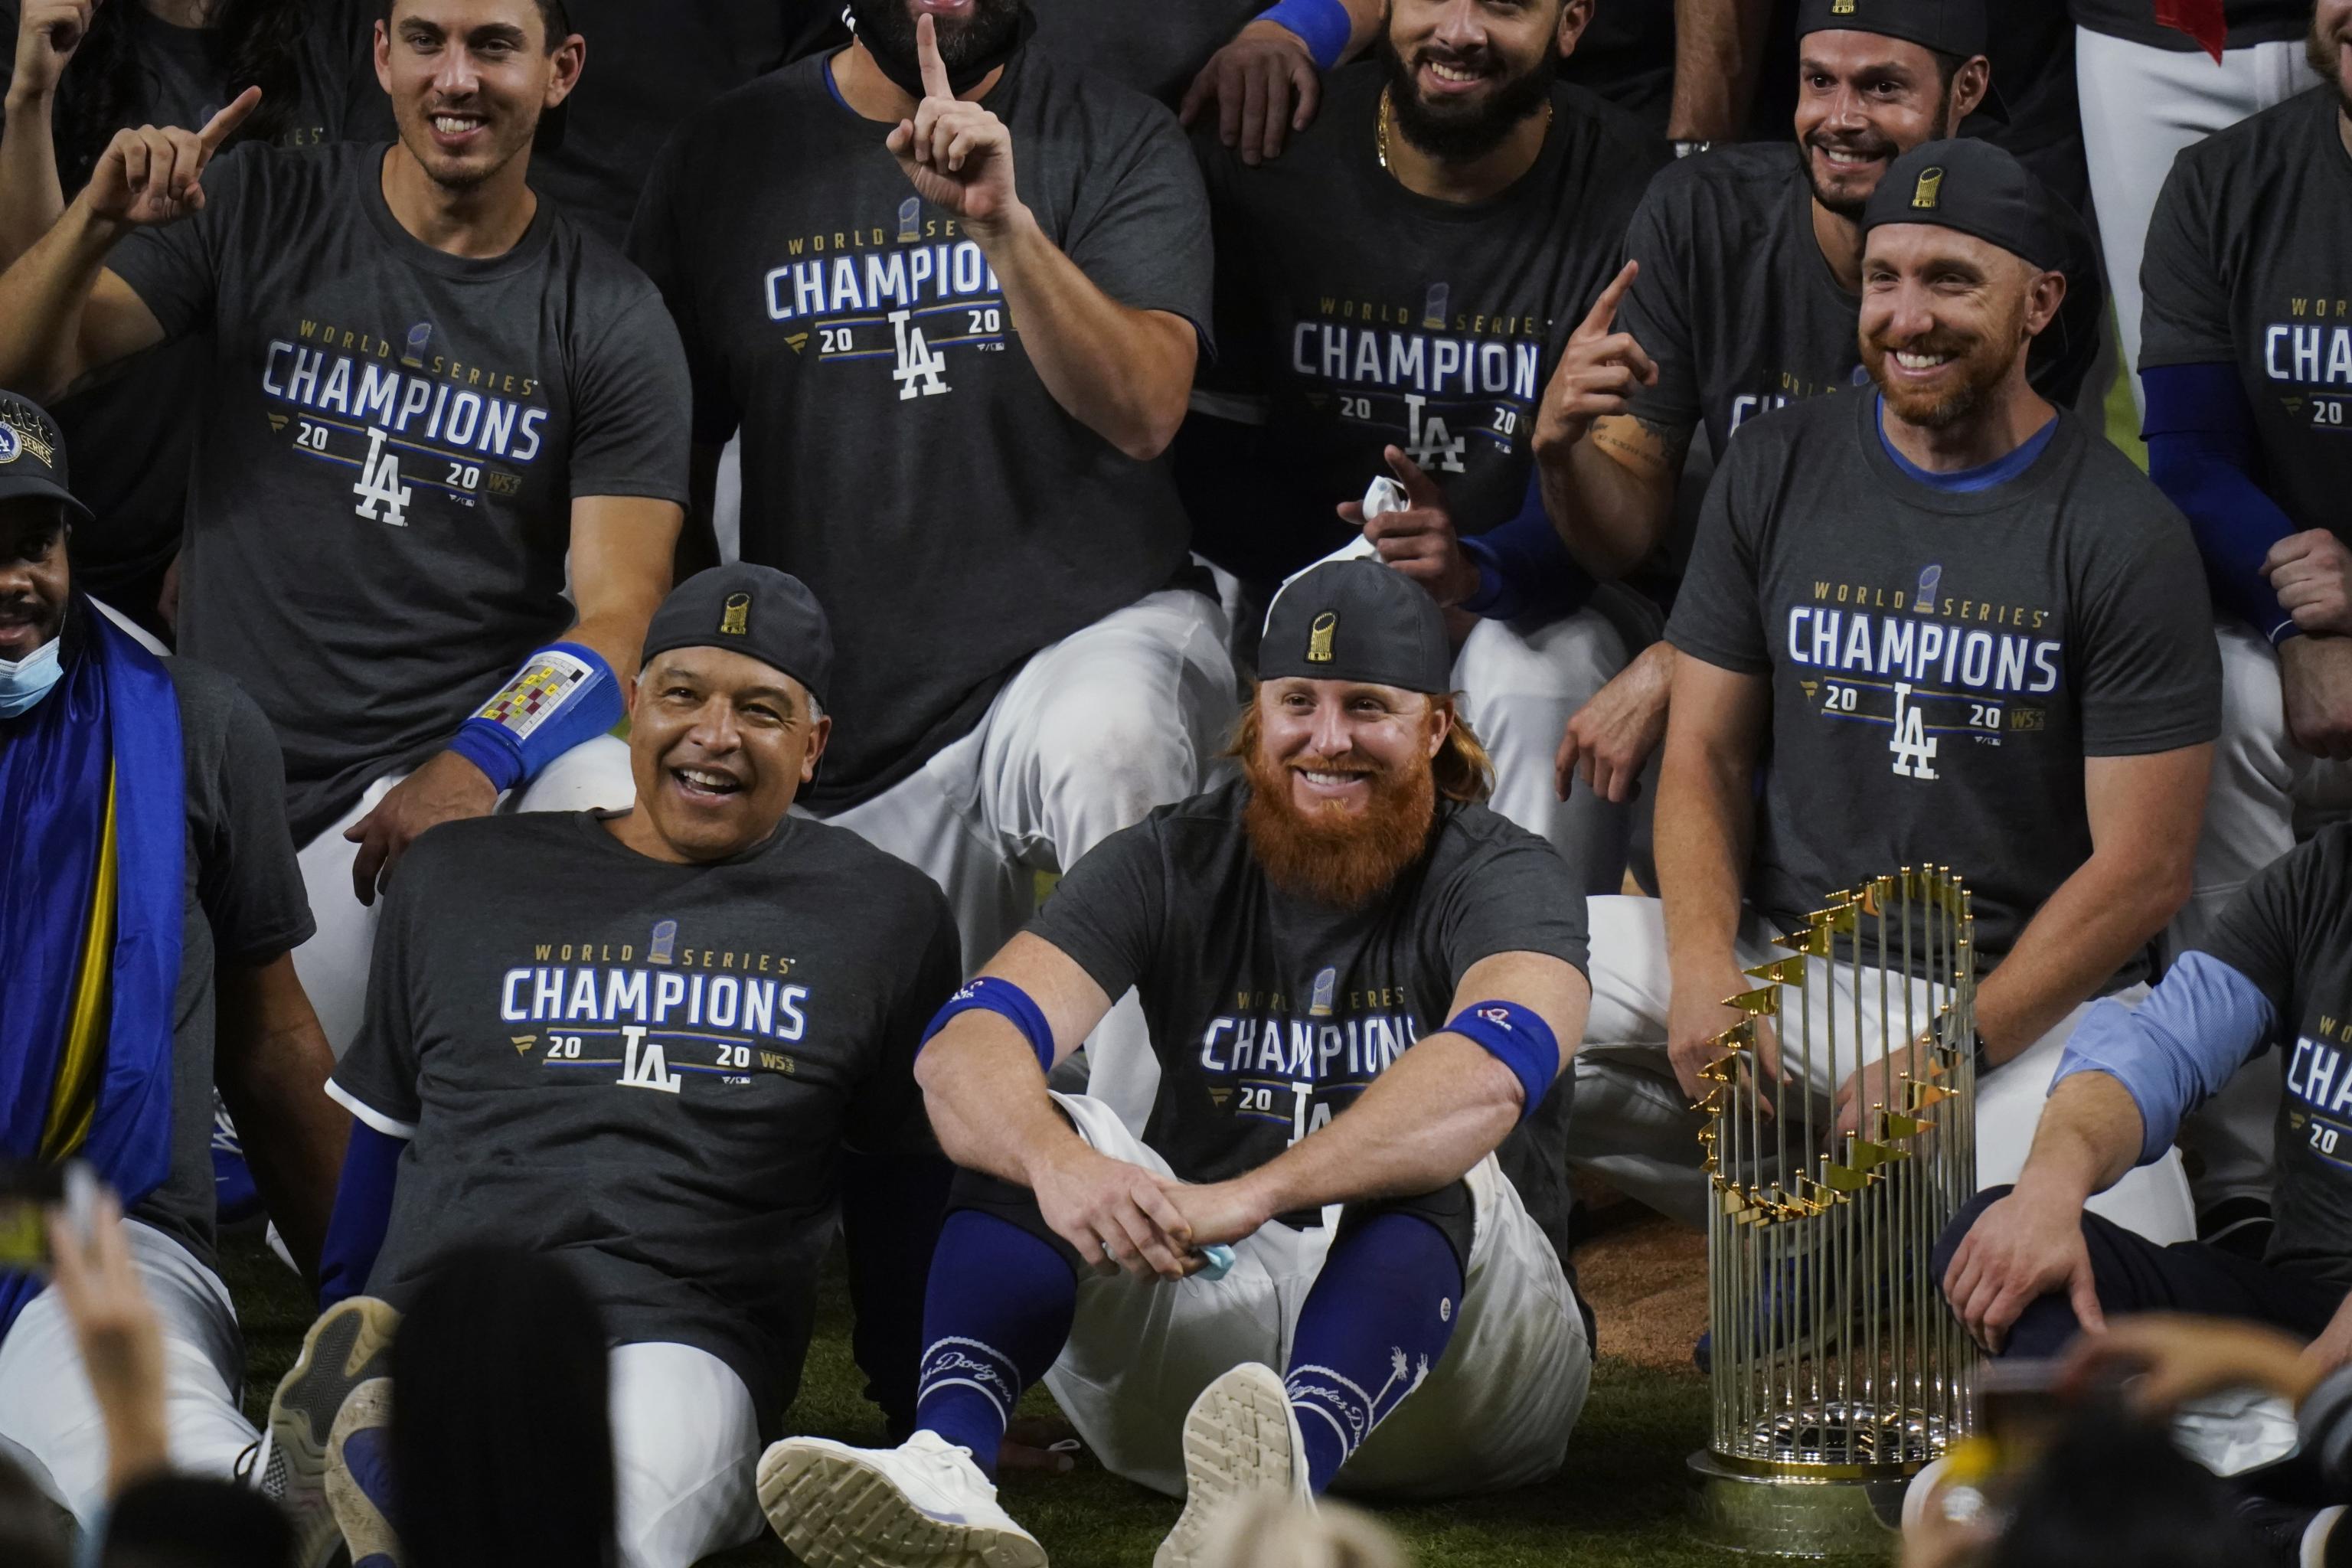 Justin Turner contract: Details of Dodgers star's $34 million deal